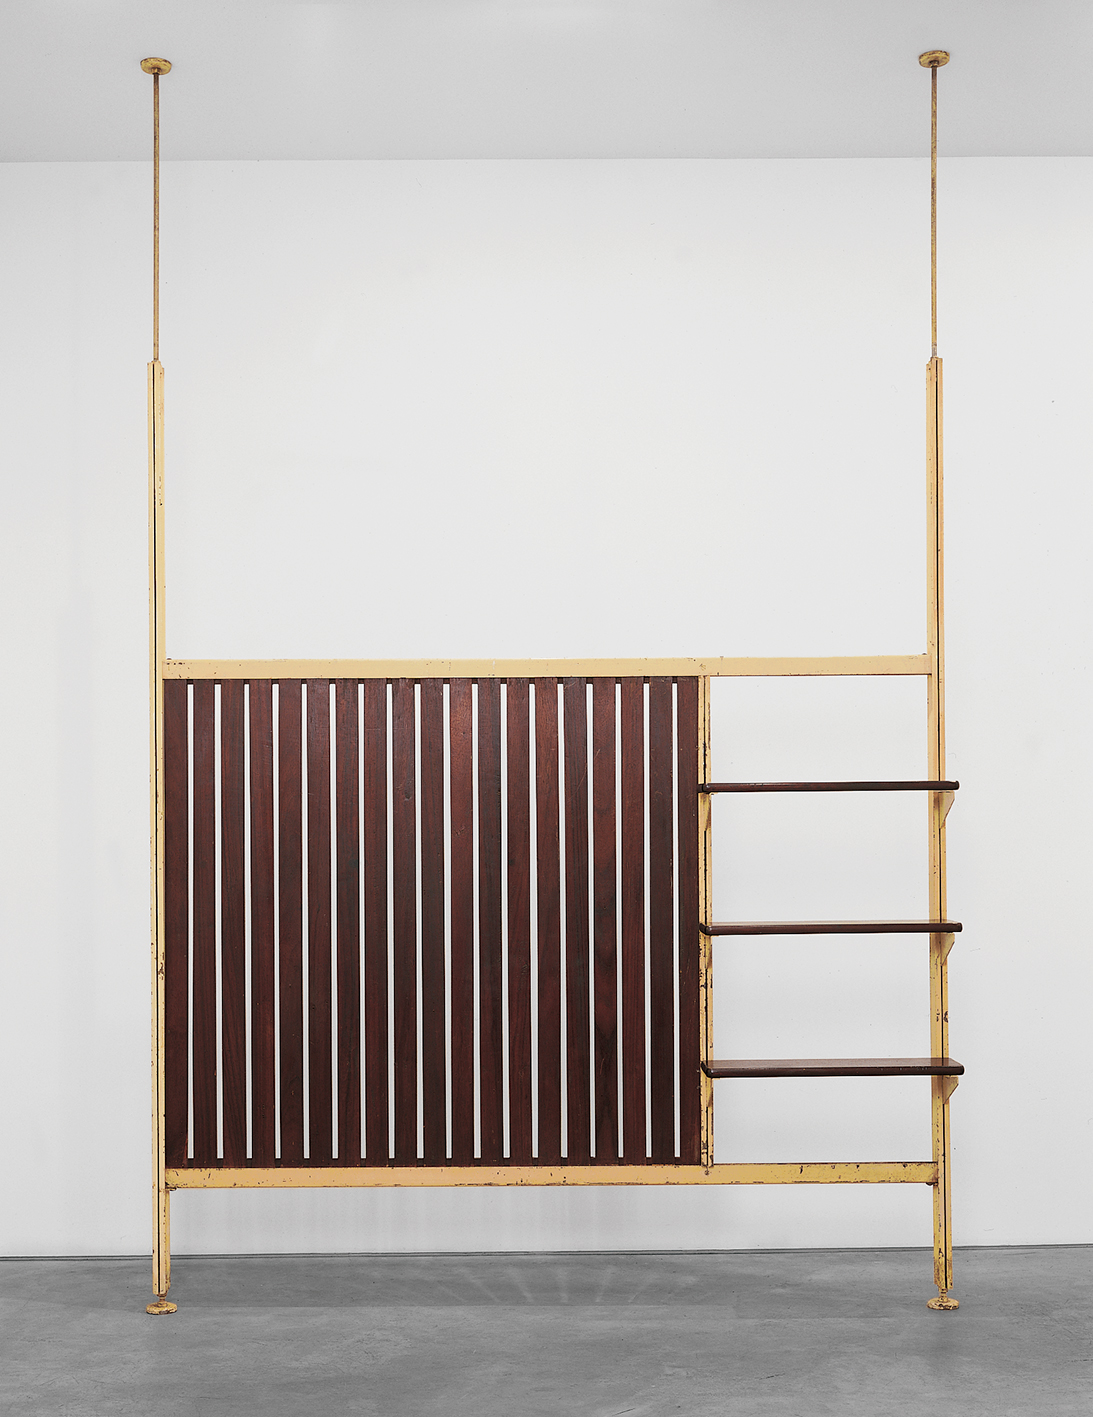 Support-channel partition/screen with Charlotte Perriand, 1952. Provenance: Air France building, Brazzaville.